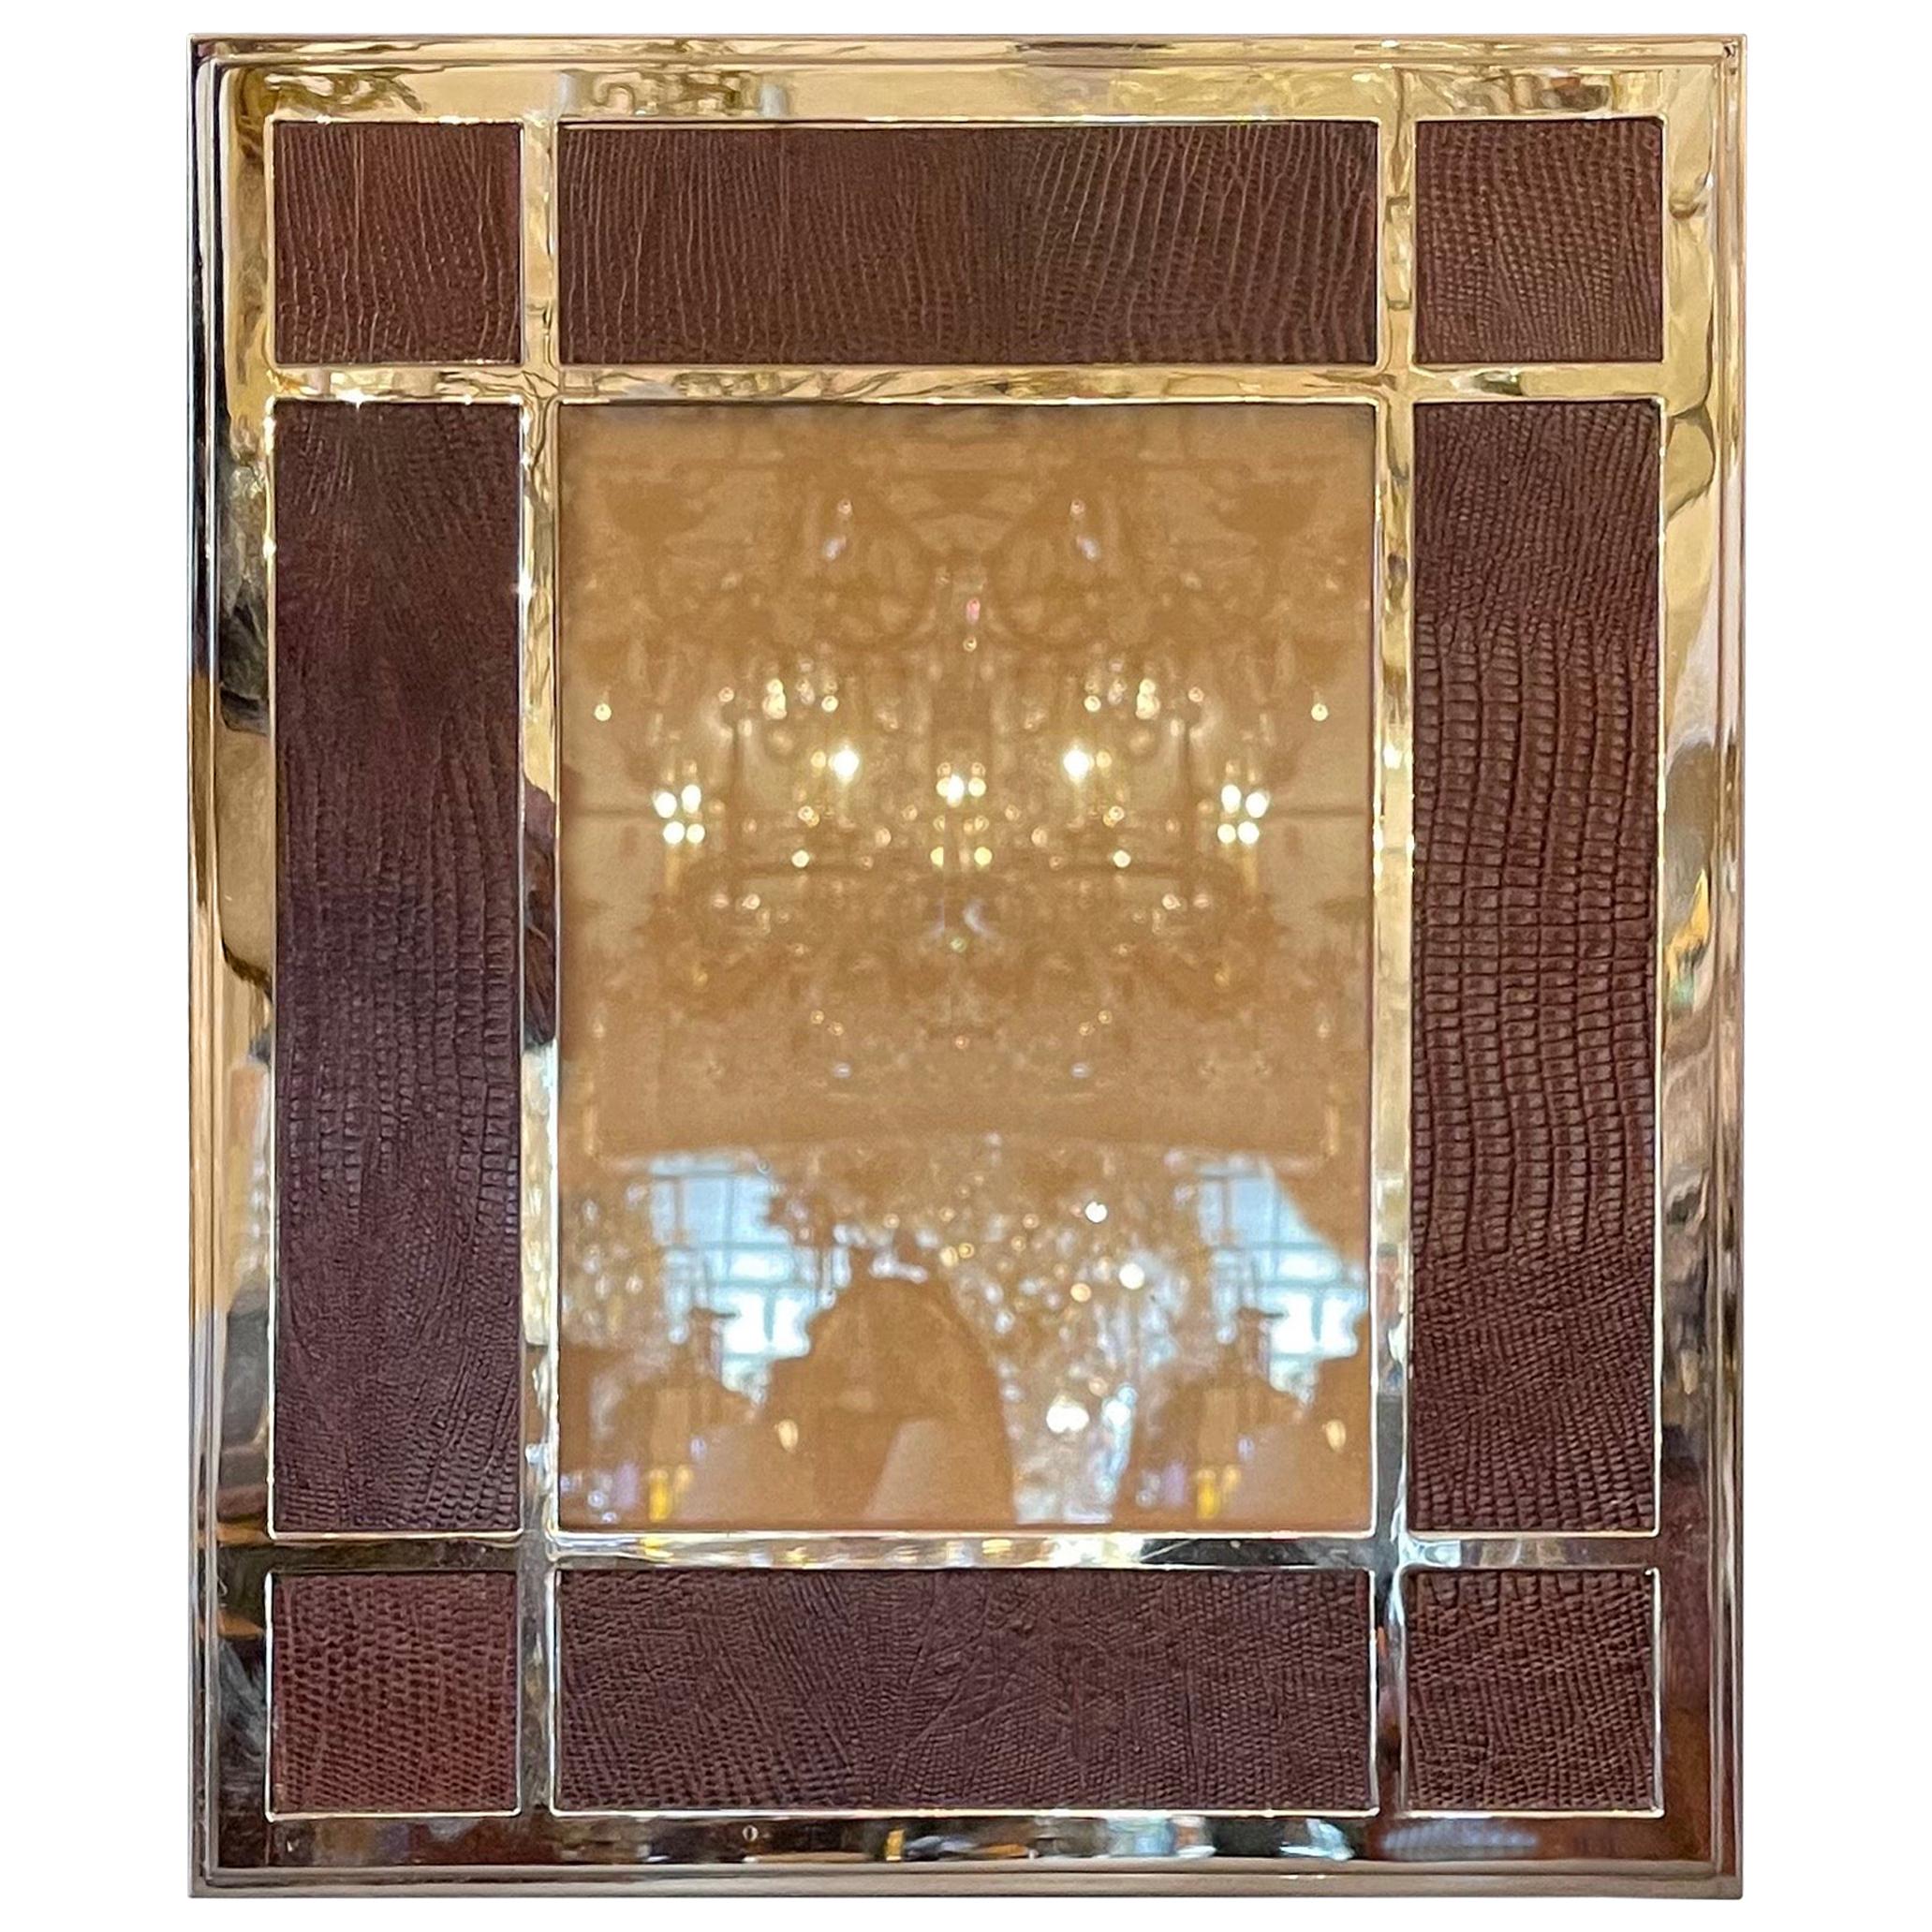 Lorin Marsh Bullnose Brown Leather Embossed Lizard Polished Nickel Picture Frame